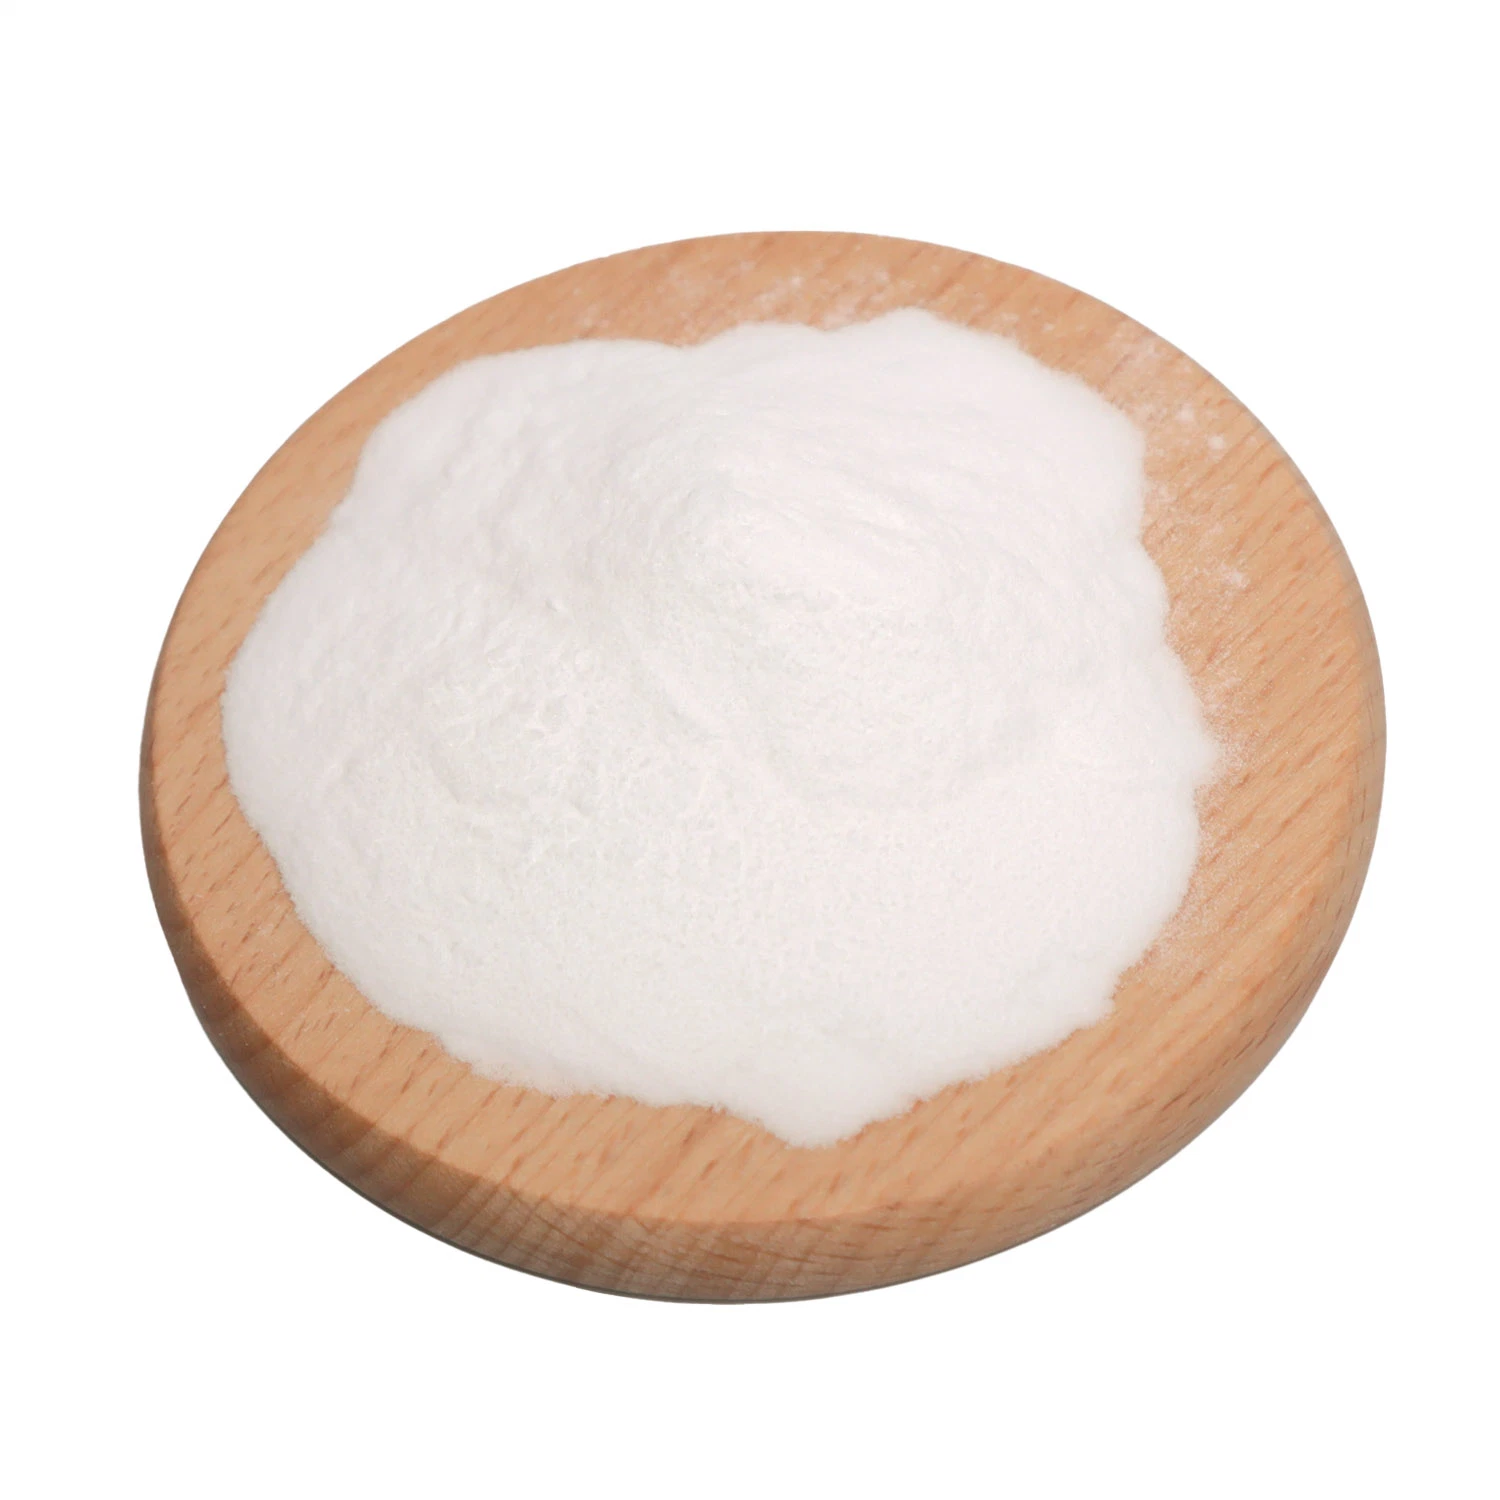 High Viscosity CMC Carboxymethyl Cellulose Powder for Food